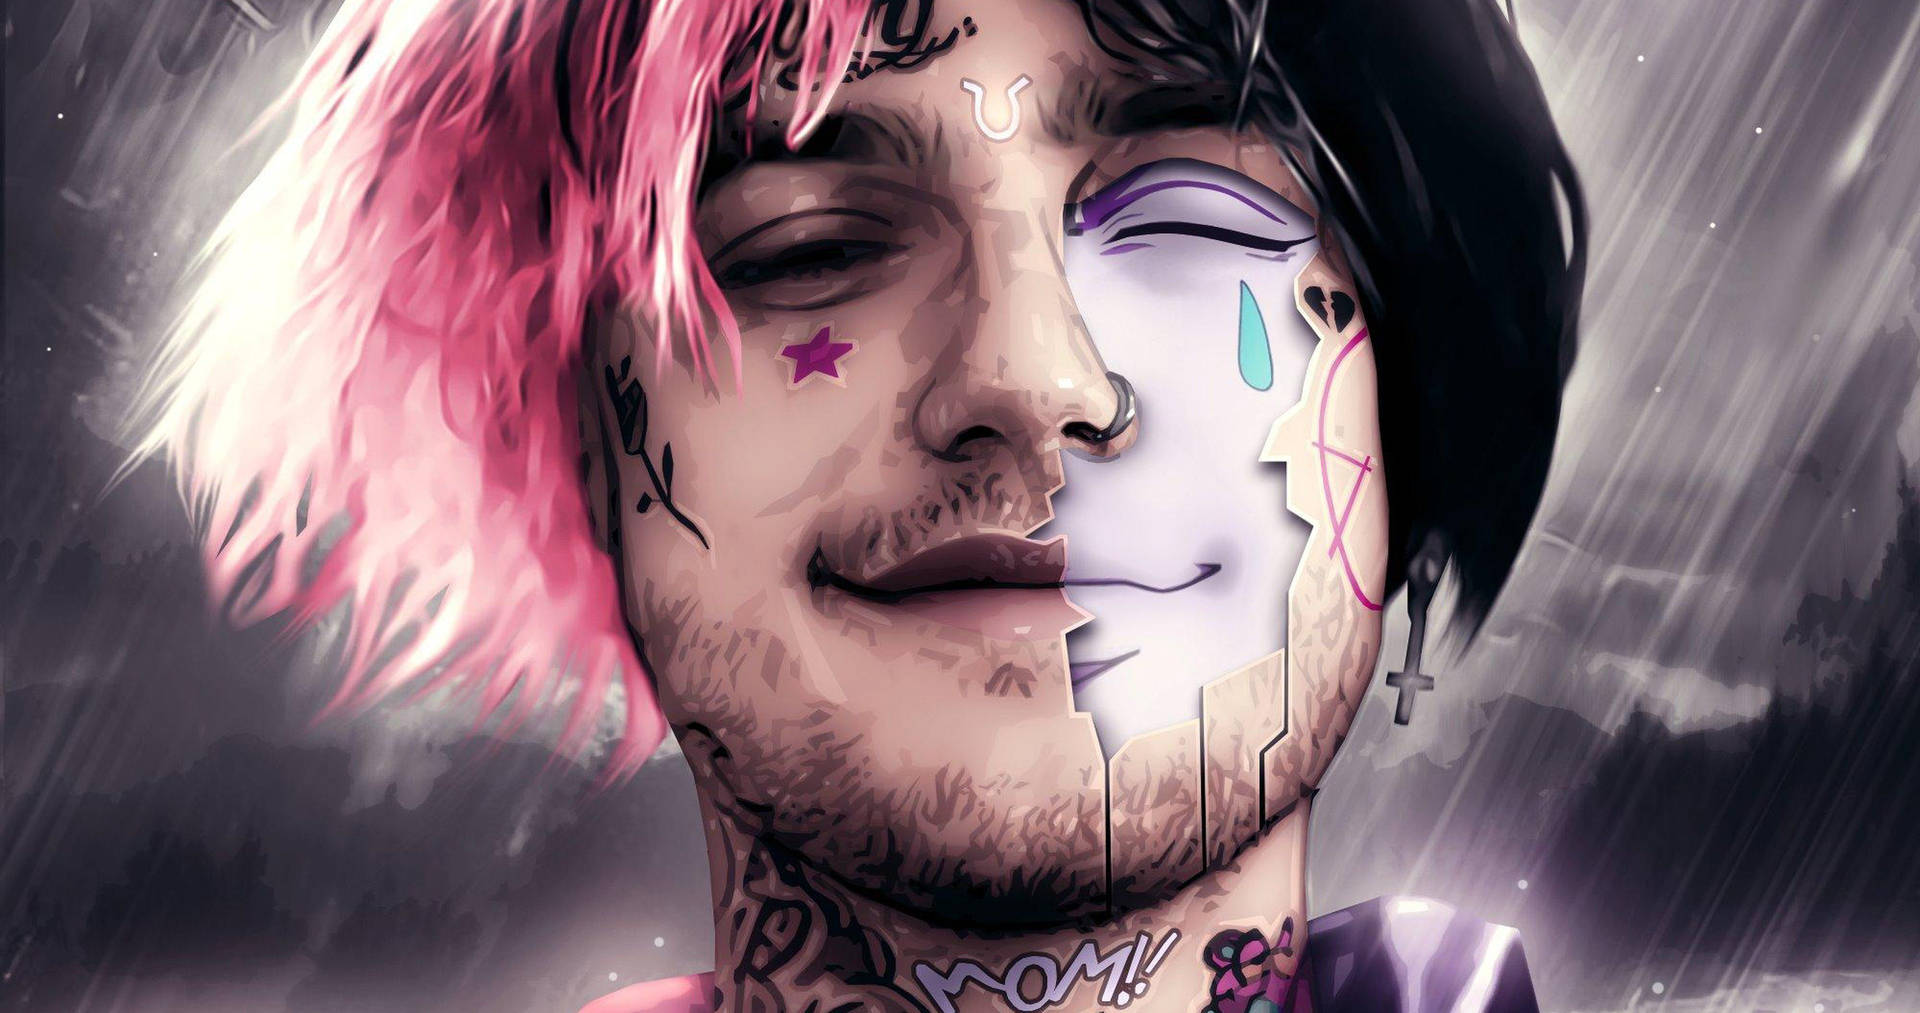 4096X2160 Lil Peep Wallpaper and Background